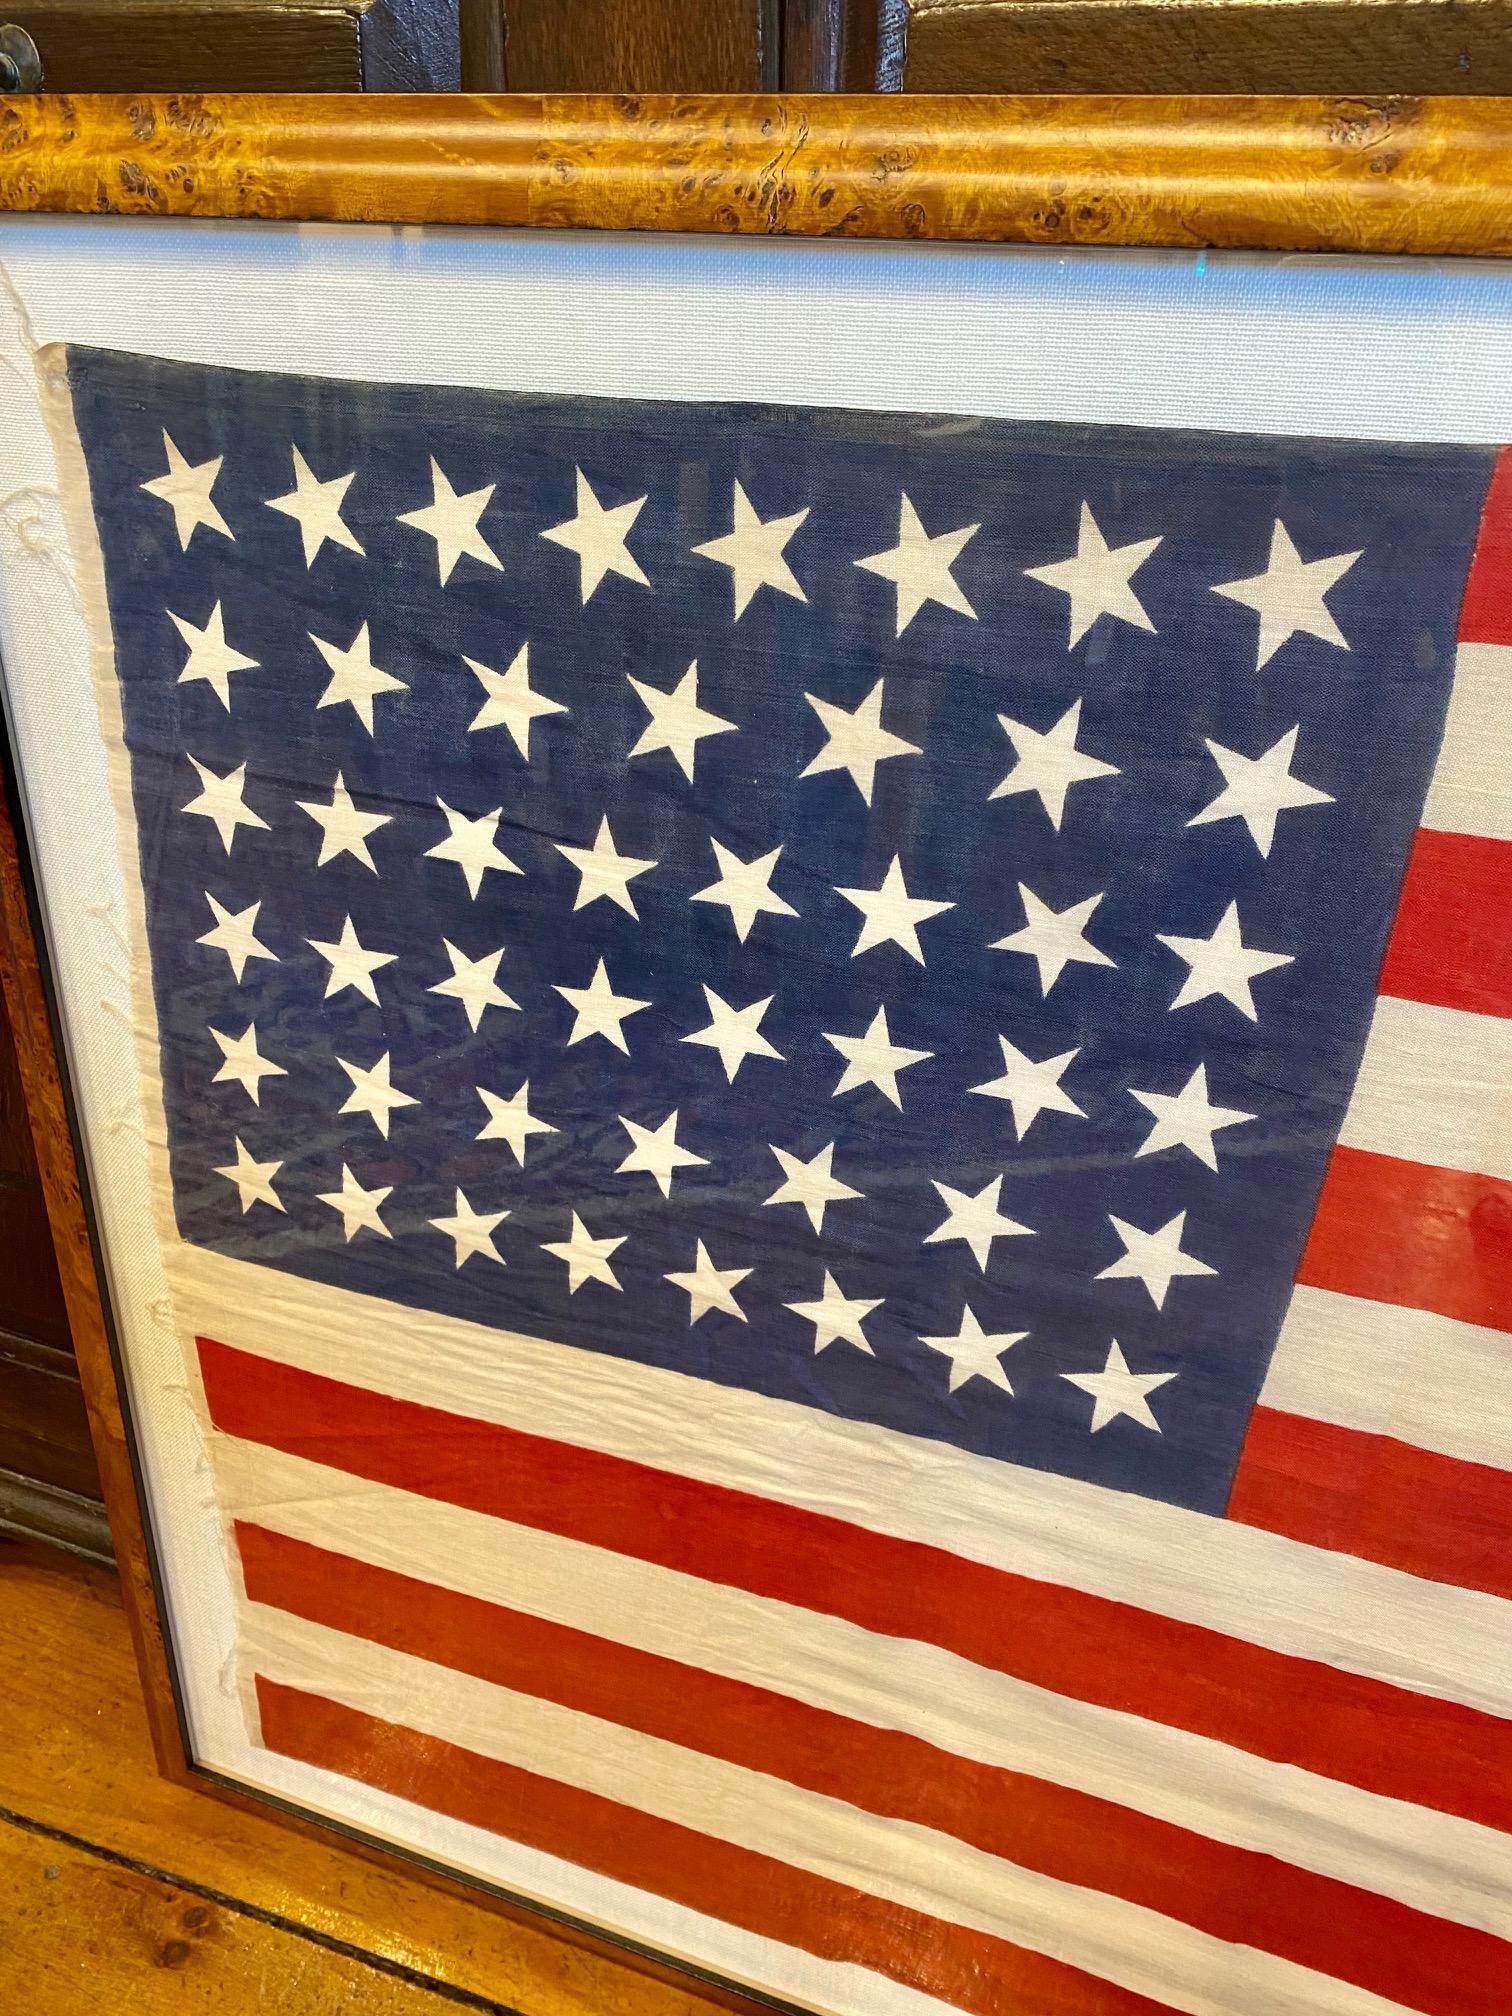 Antique American 46 Star flag, circa 1908, celebrating the admission of Indian Territory as the state of Oklahoma. An official flag of the United States for only four years. Made in a great 